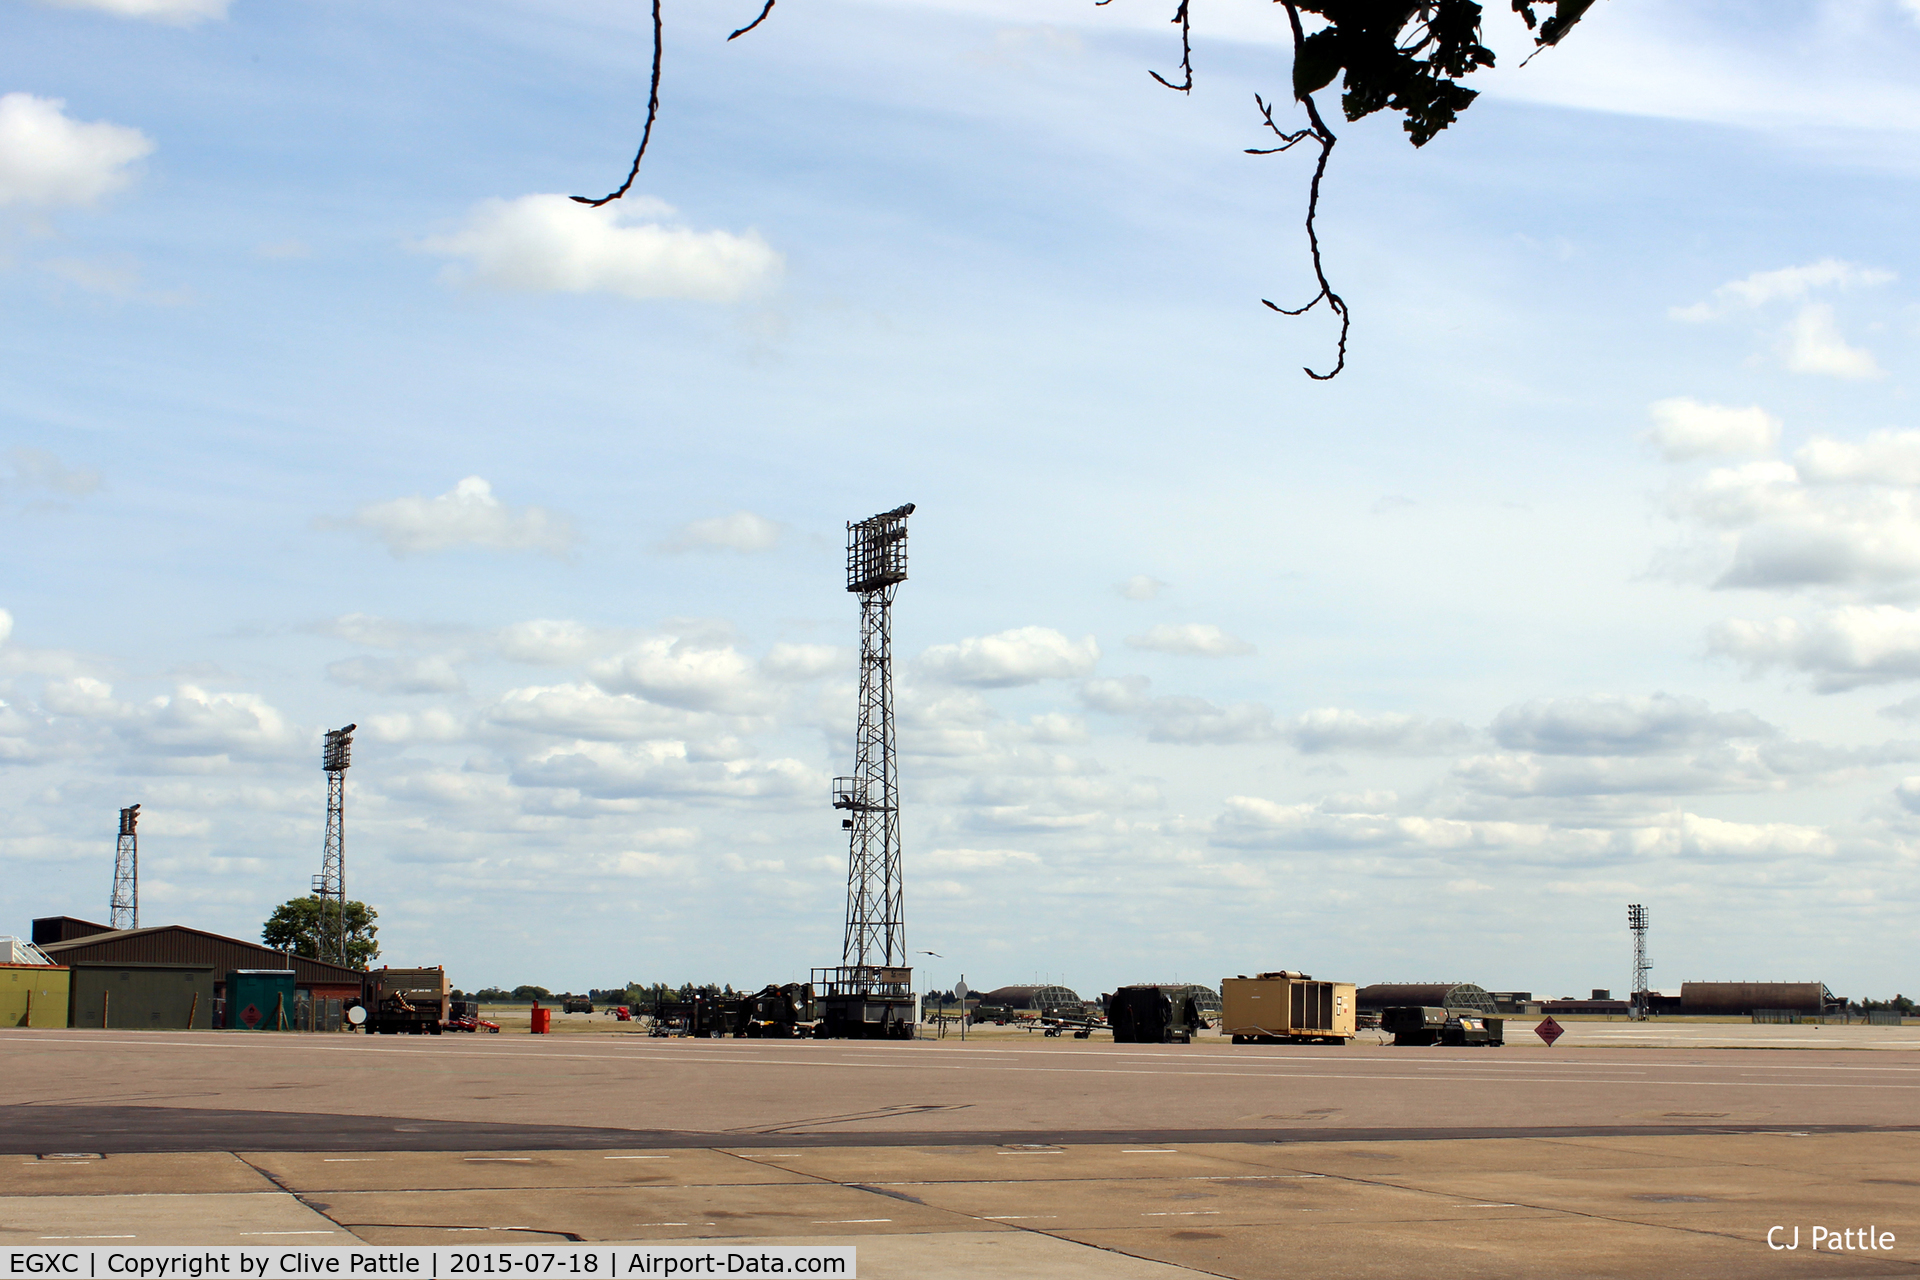 RAF Coningsby Airport, Coningsby, England United Kingdom (EGXC) - An uncluttered view of the main apron at RAF Coningsby EGXC